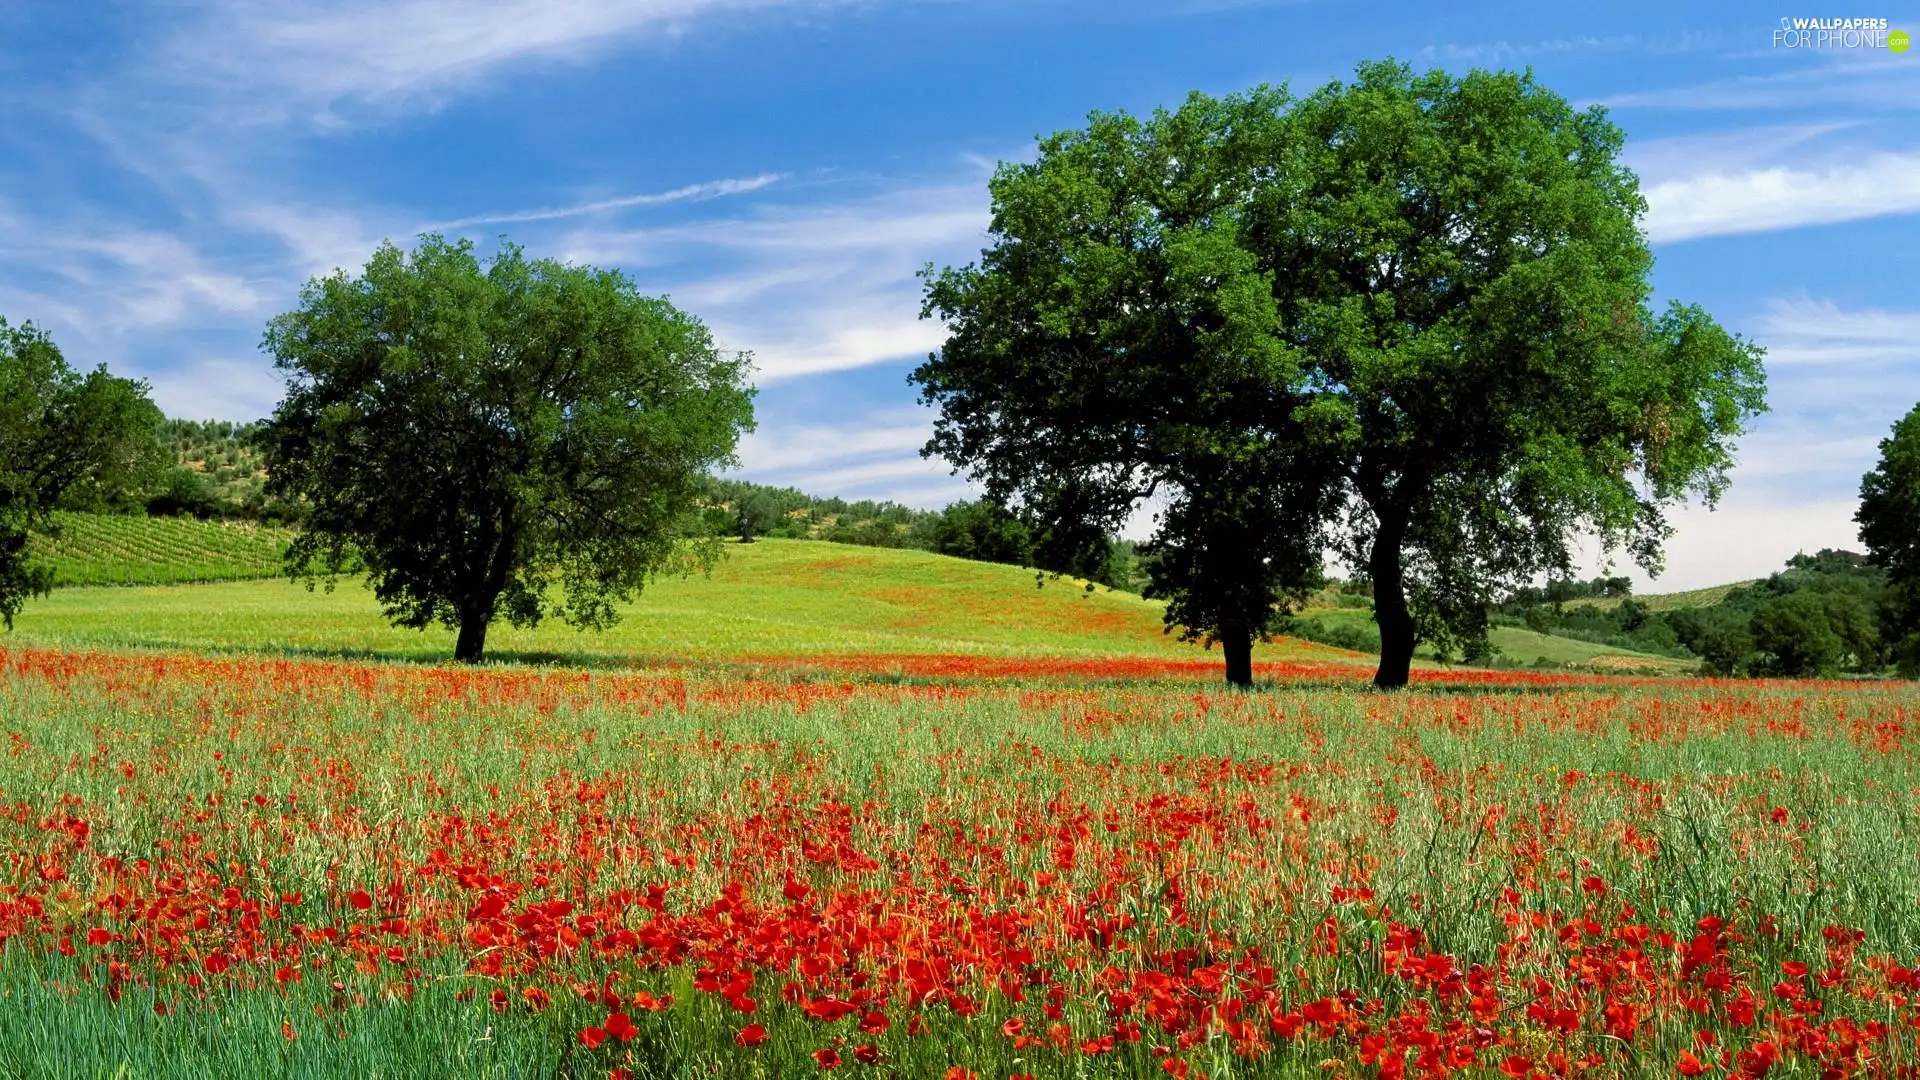 trees, viewes, Flowers, papavers, Meadow